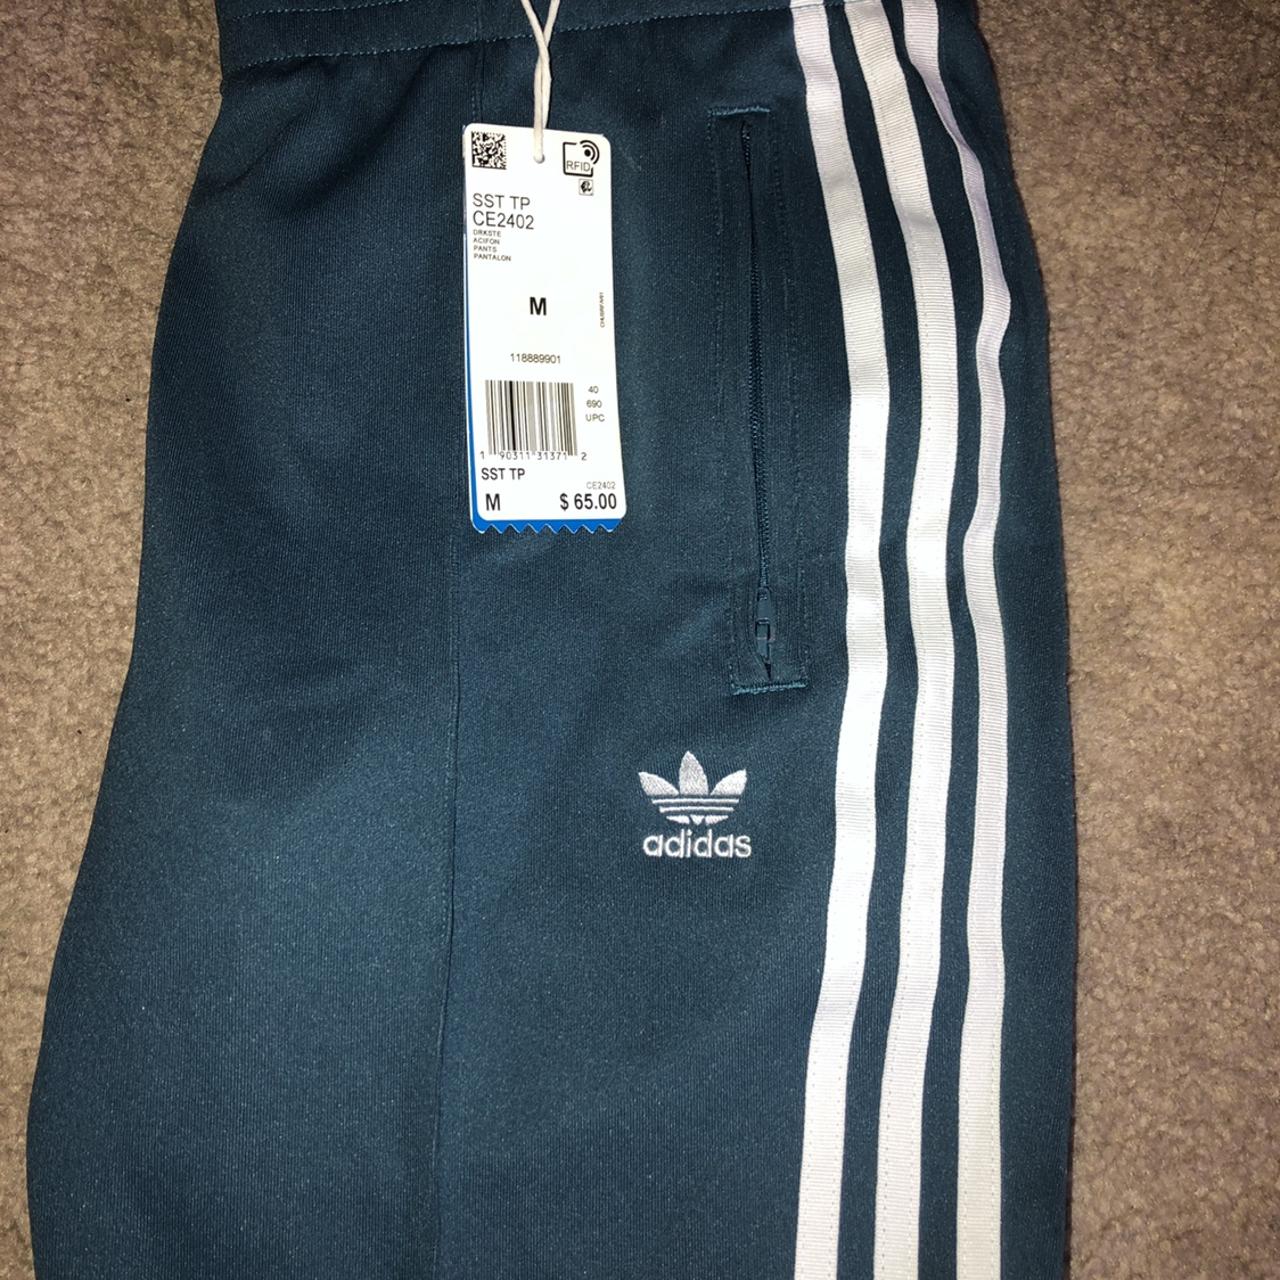 New with tags adidas pants. Teal, -